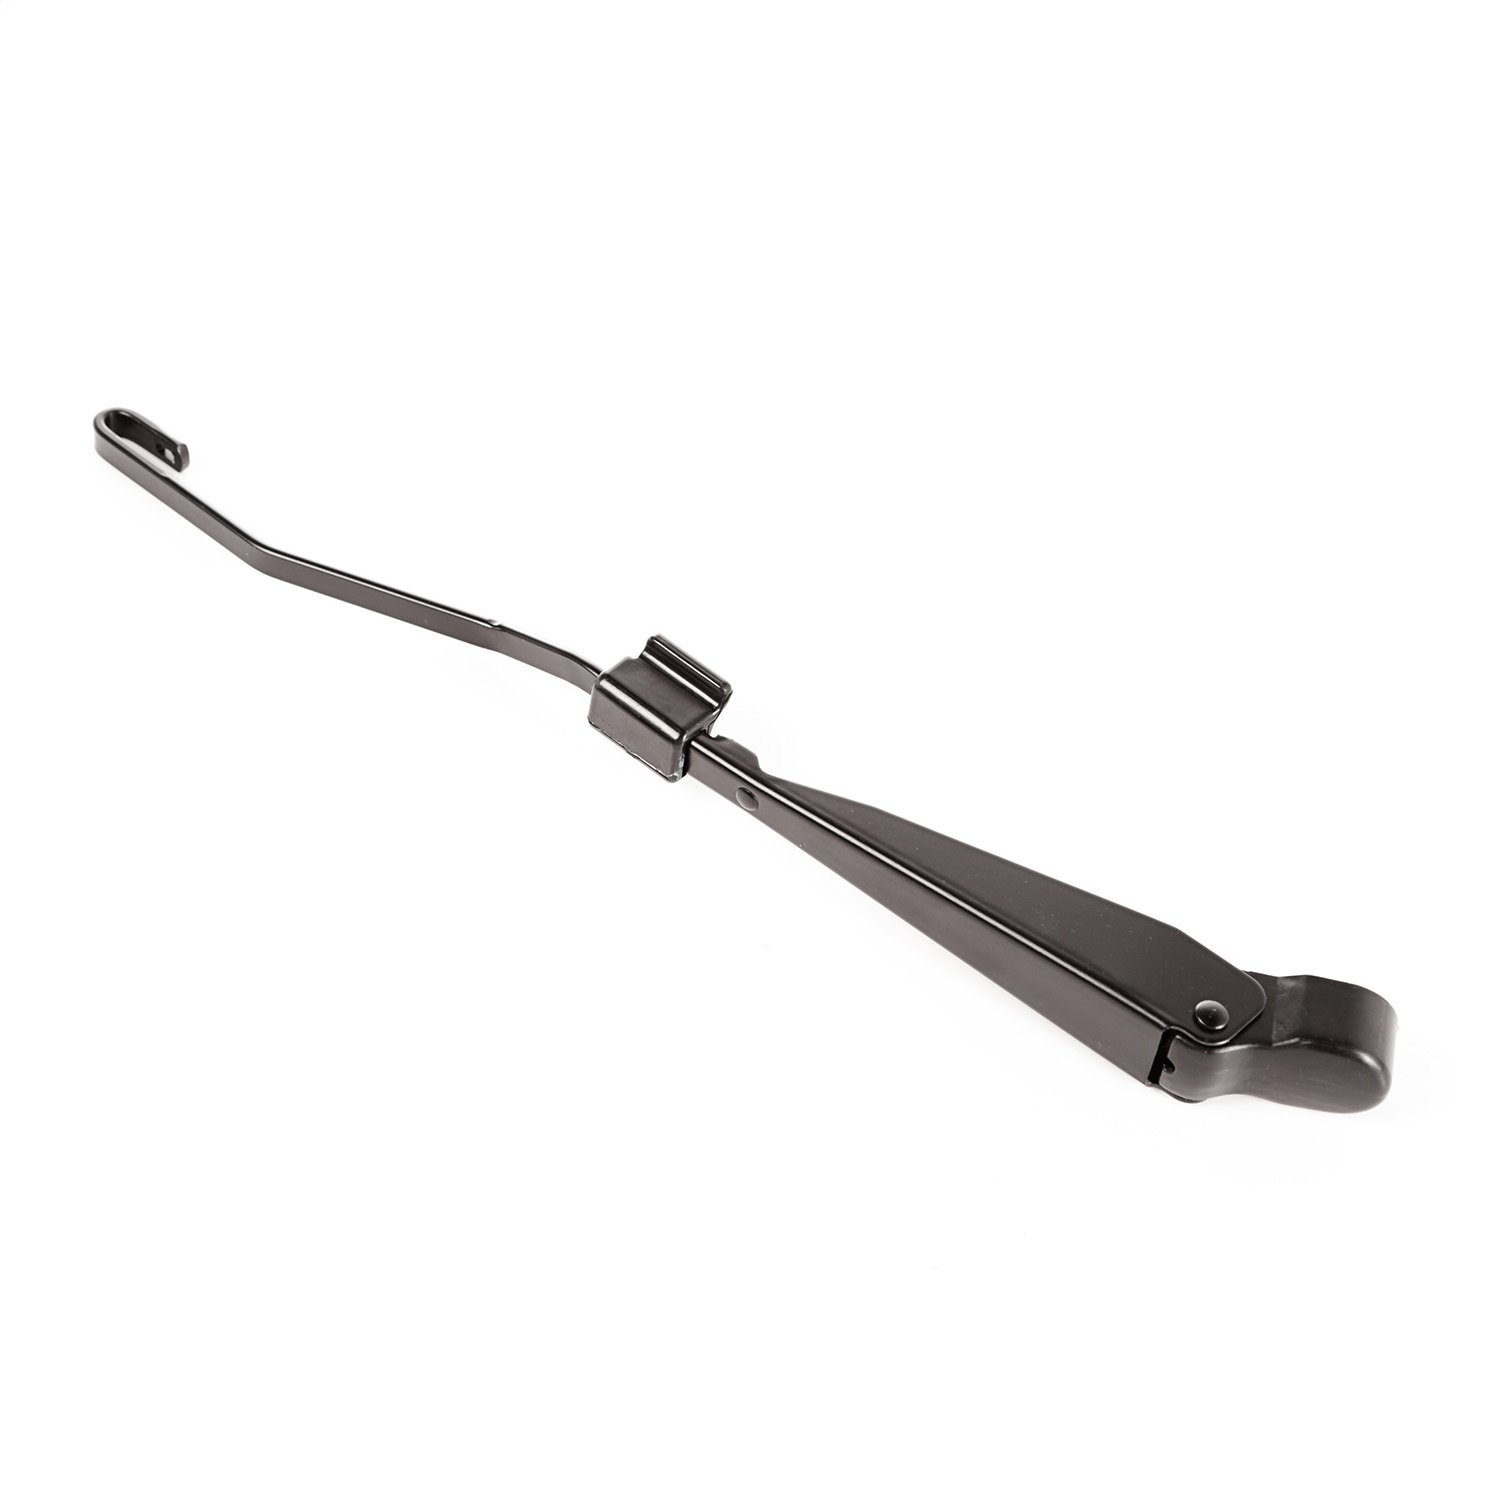 Replacement rear windshield wiper arm from Omix-ADA, Fits 95-96 Jeep Grand Cherokees with a flip